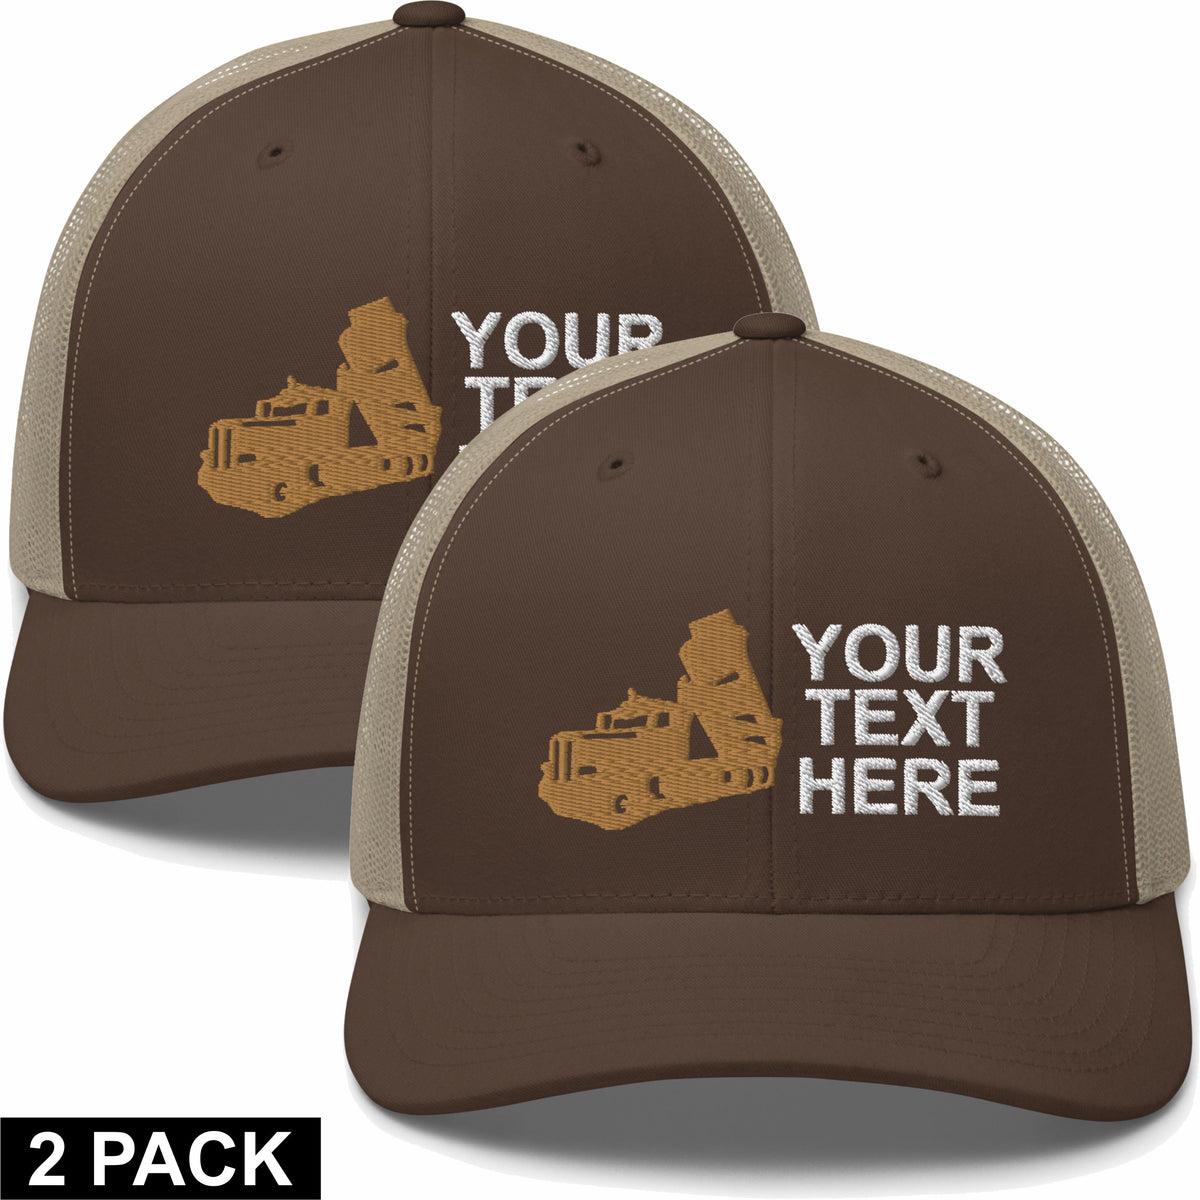 2 Embroidered Hats - Dump Truck - Your Text Here - Free Shipping